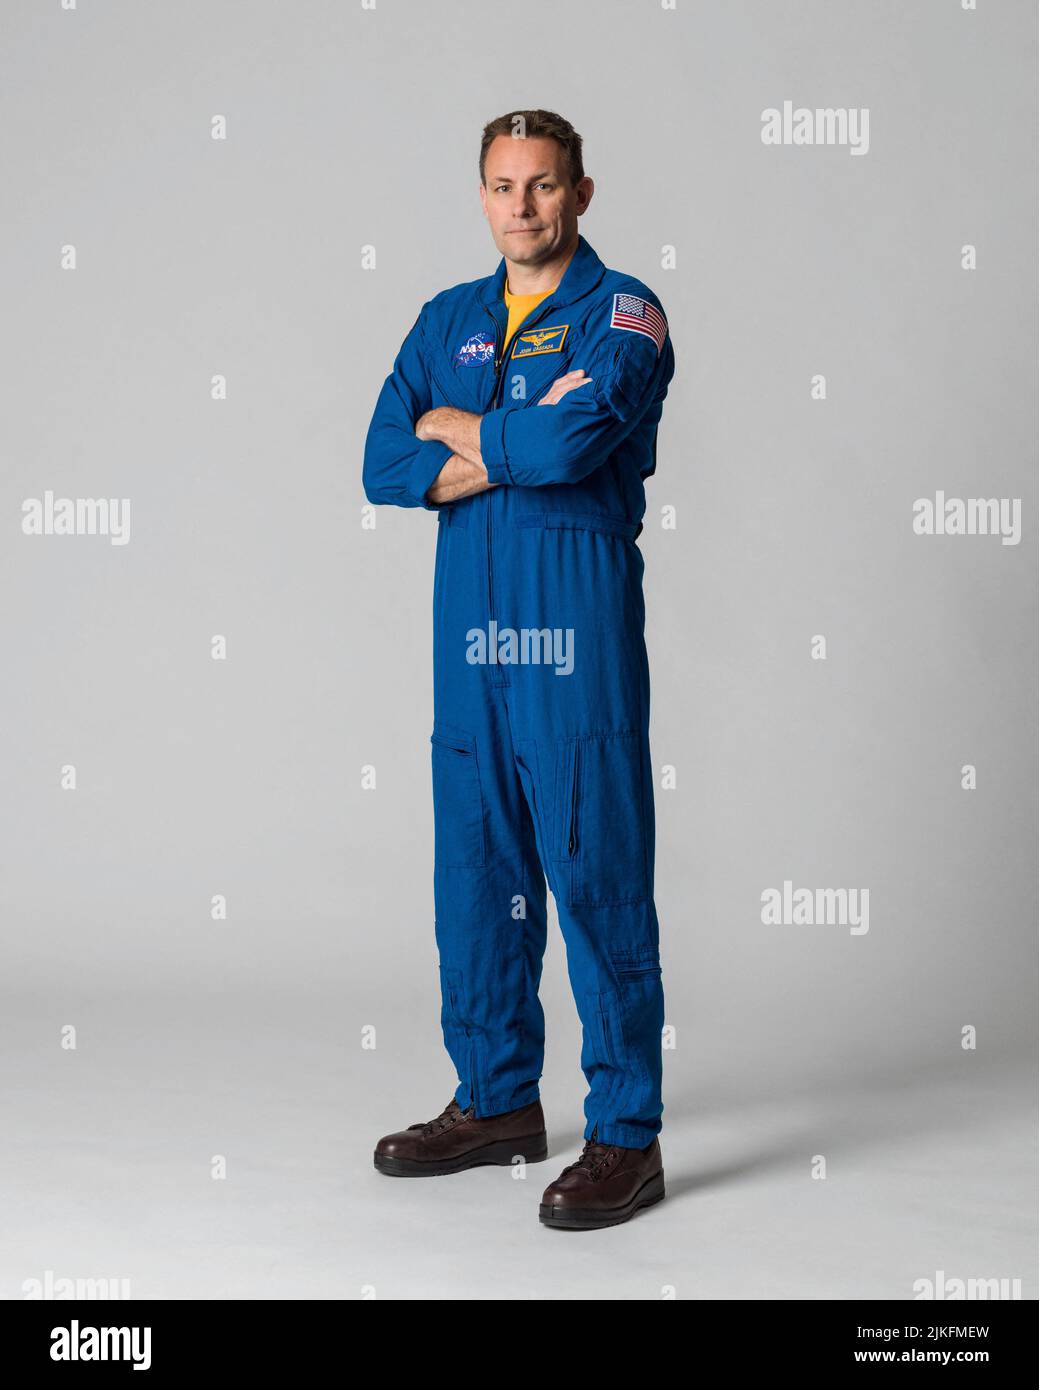 NASA Astronaut Josh Cassada poses for a portrait before his launch to the  International Space Station